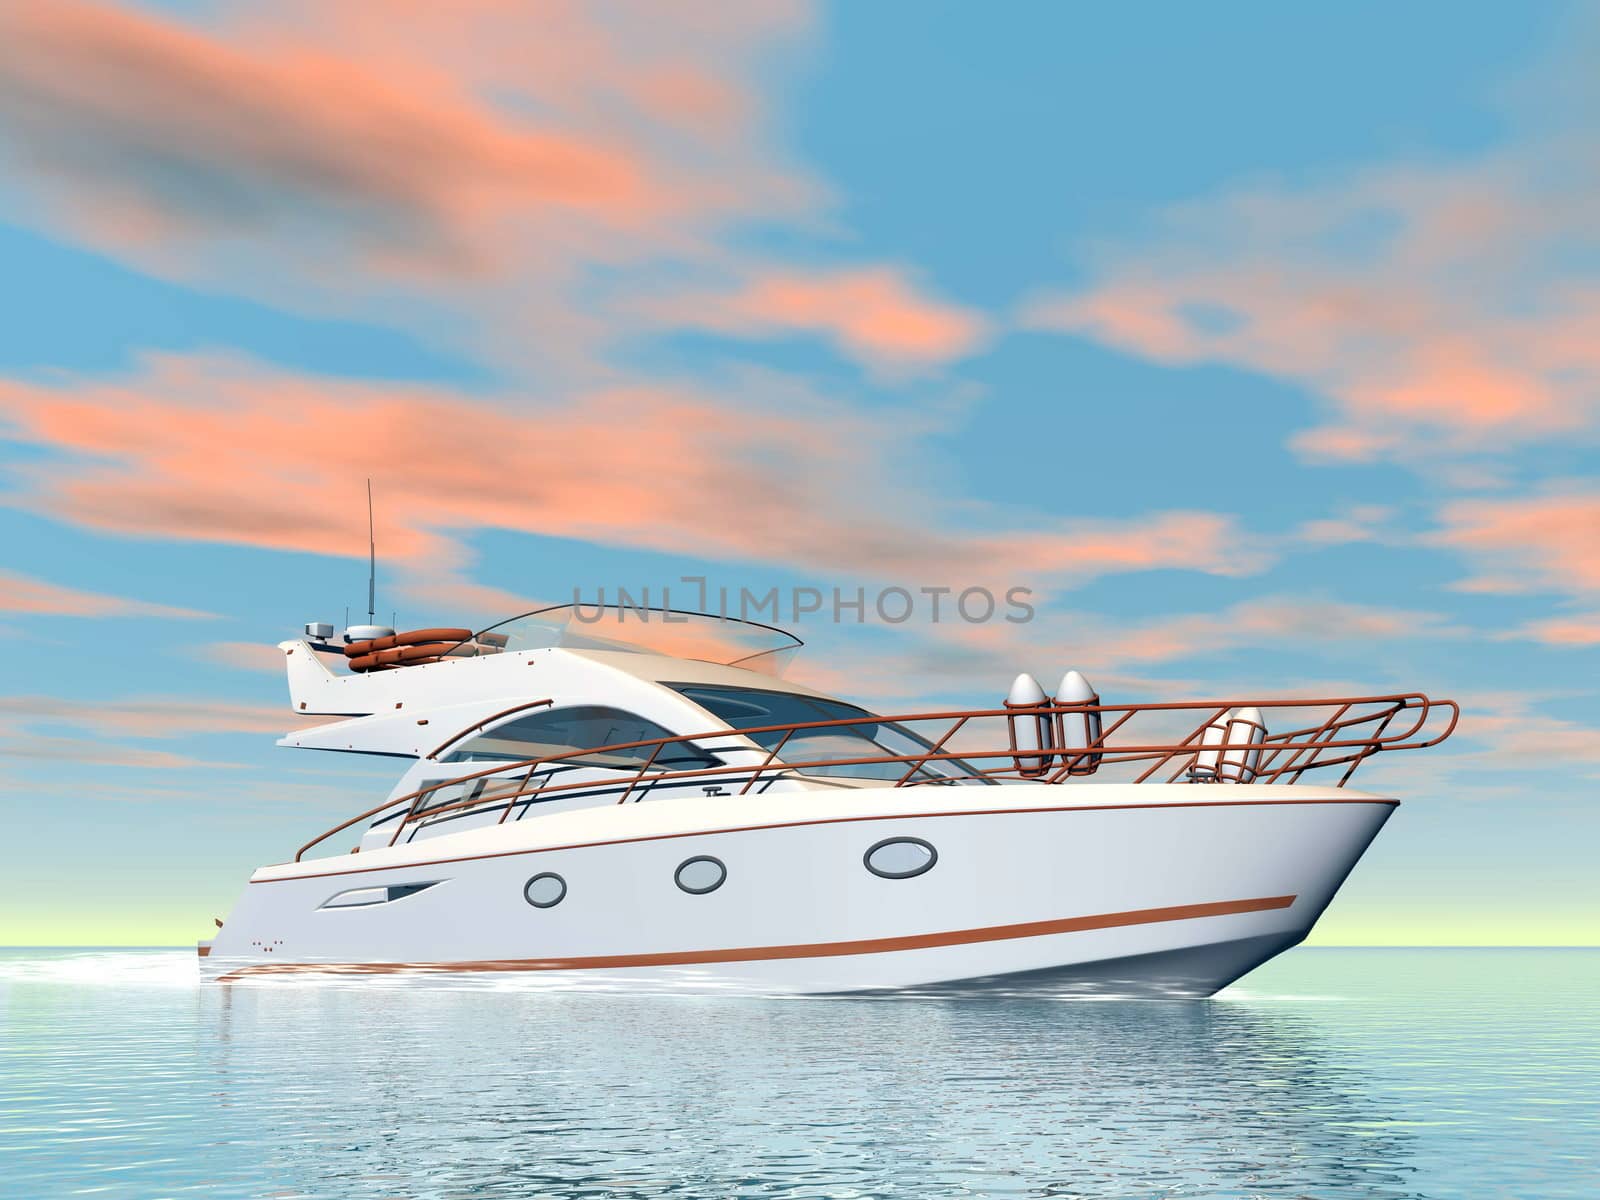 Nice white yacht on water by colorful sunset